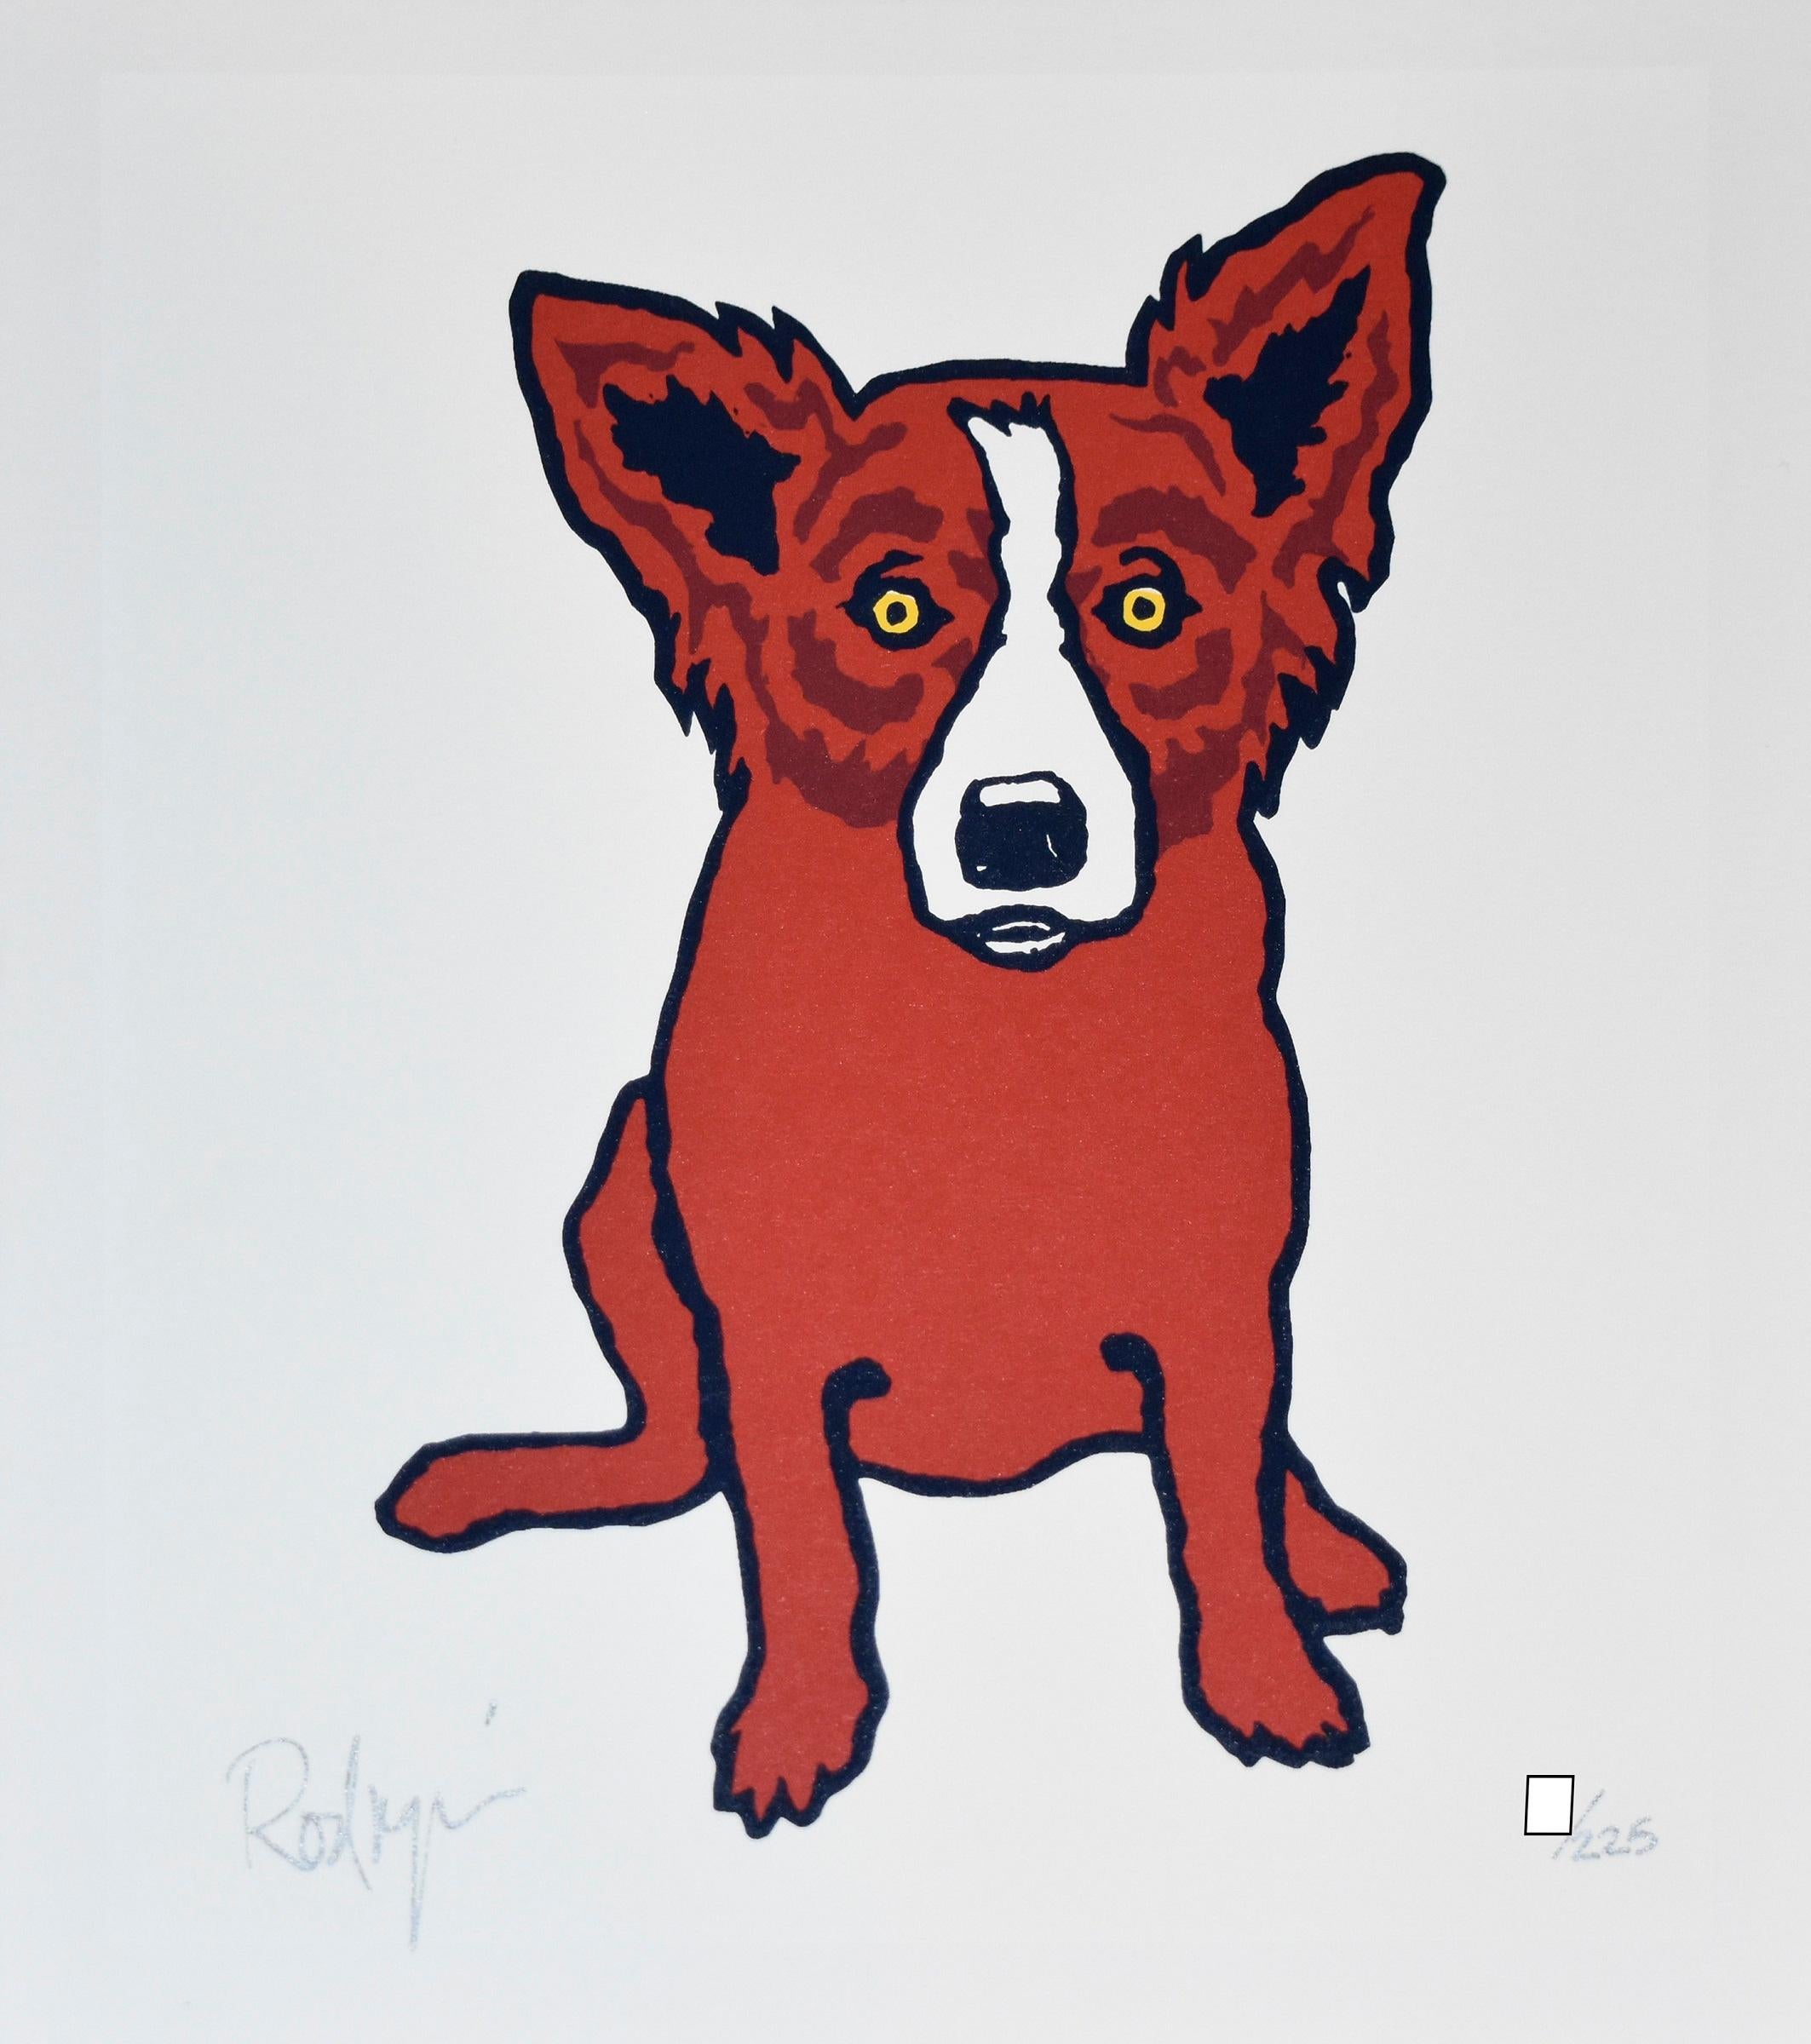 This Blue Dog work consists of one red dog sitting on a white background.  The dog has soulful yellow eyes.  This pop art animal original silkscreen print on paper is hand signed by the artist.

Artist:  George Rodrigue
Title:  Blue Dog “Little Hot